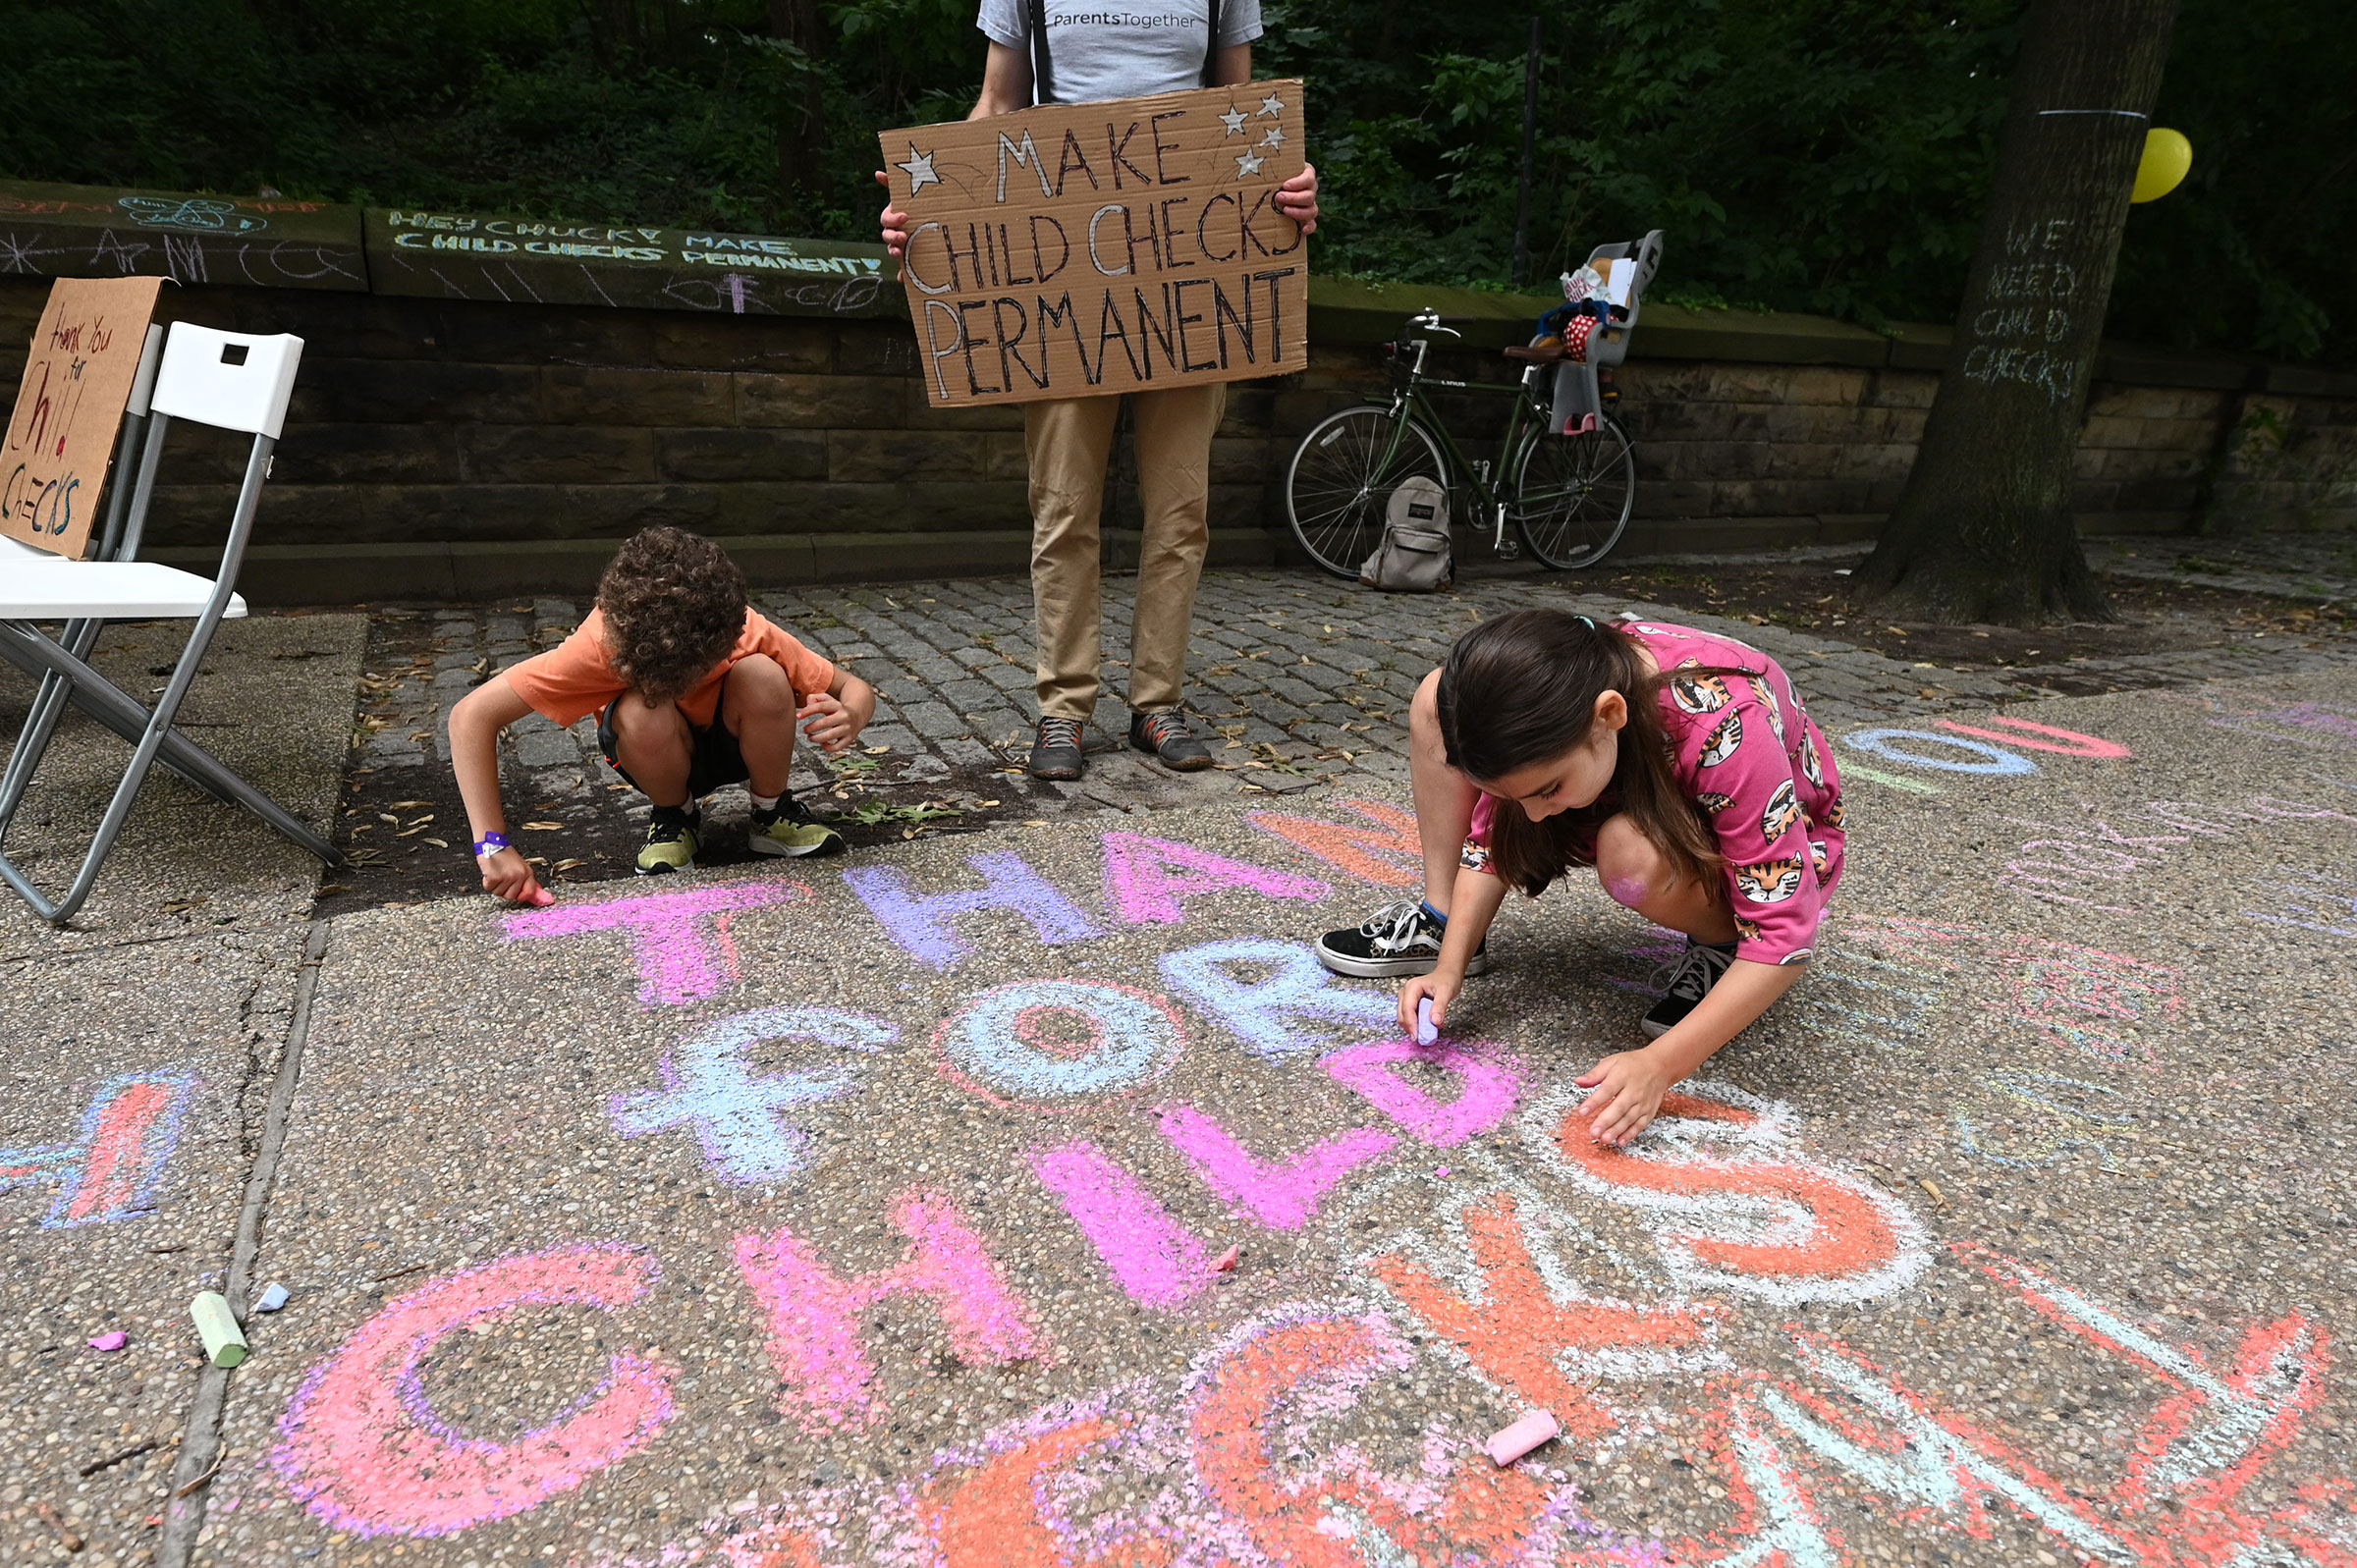 Justin Ruben, Rime Leonard and  Edie Abrams-Pradt draw with chalk to celebrate new monthly Child Tax Credit payments and urge congress to make them permanent outside Senator Schumer's home on July 12, 2021 in Brooklyn, New York. (Bryan Bedder—Getty Images/ParentsTogether)